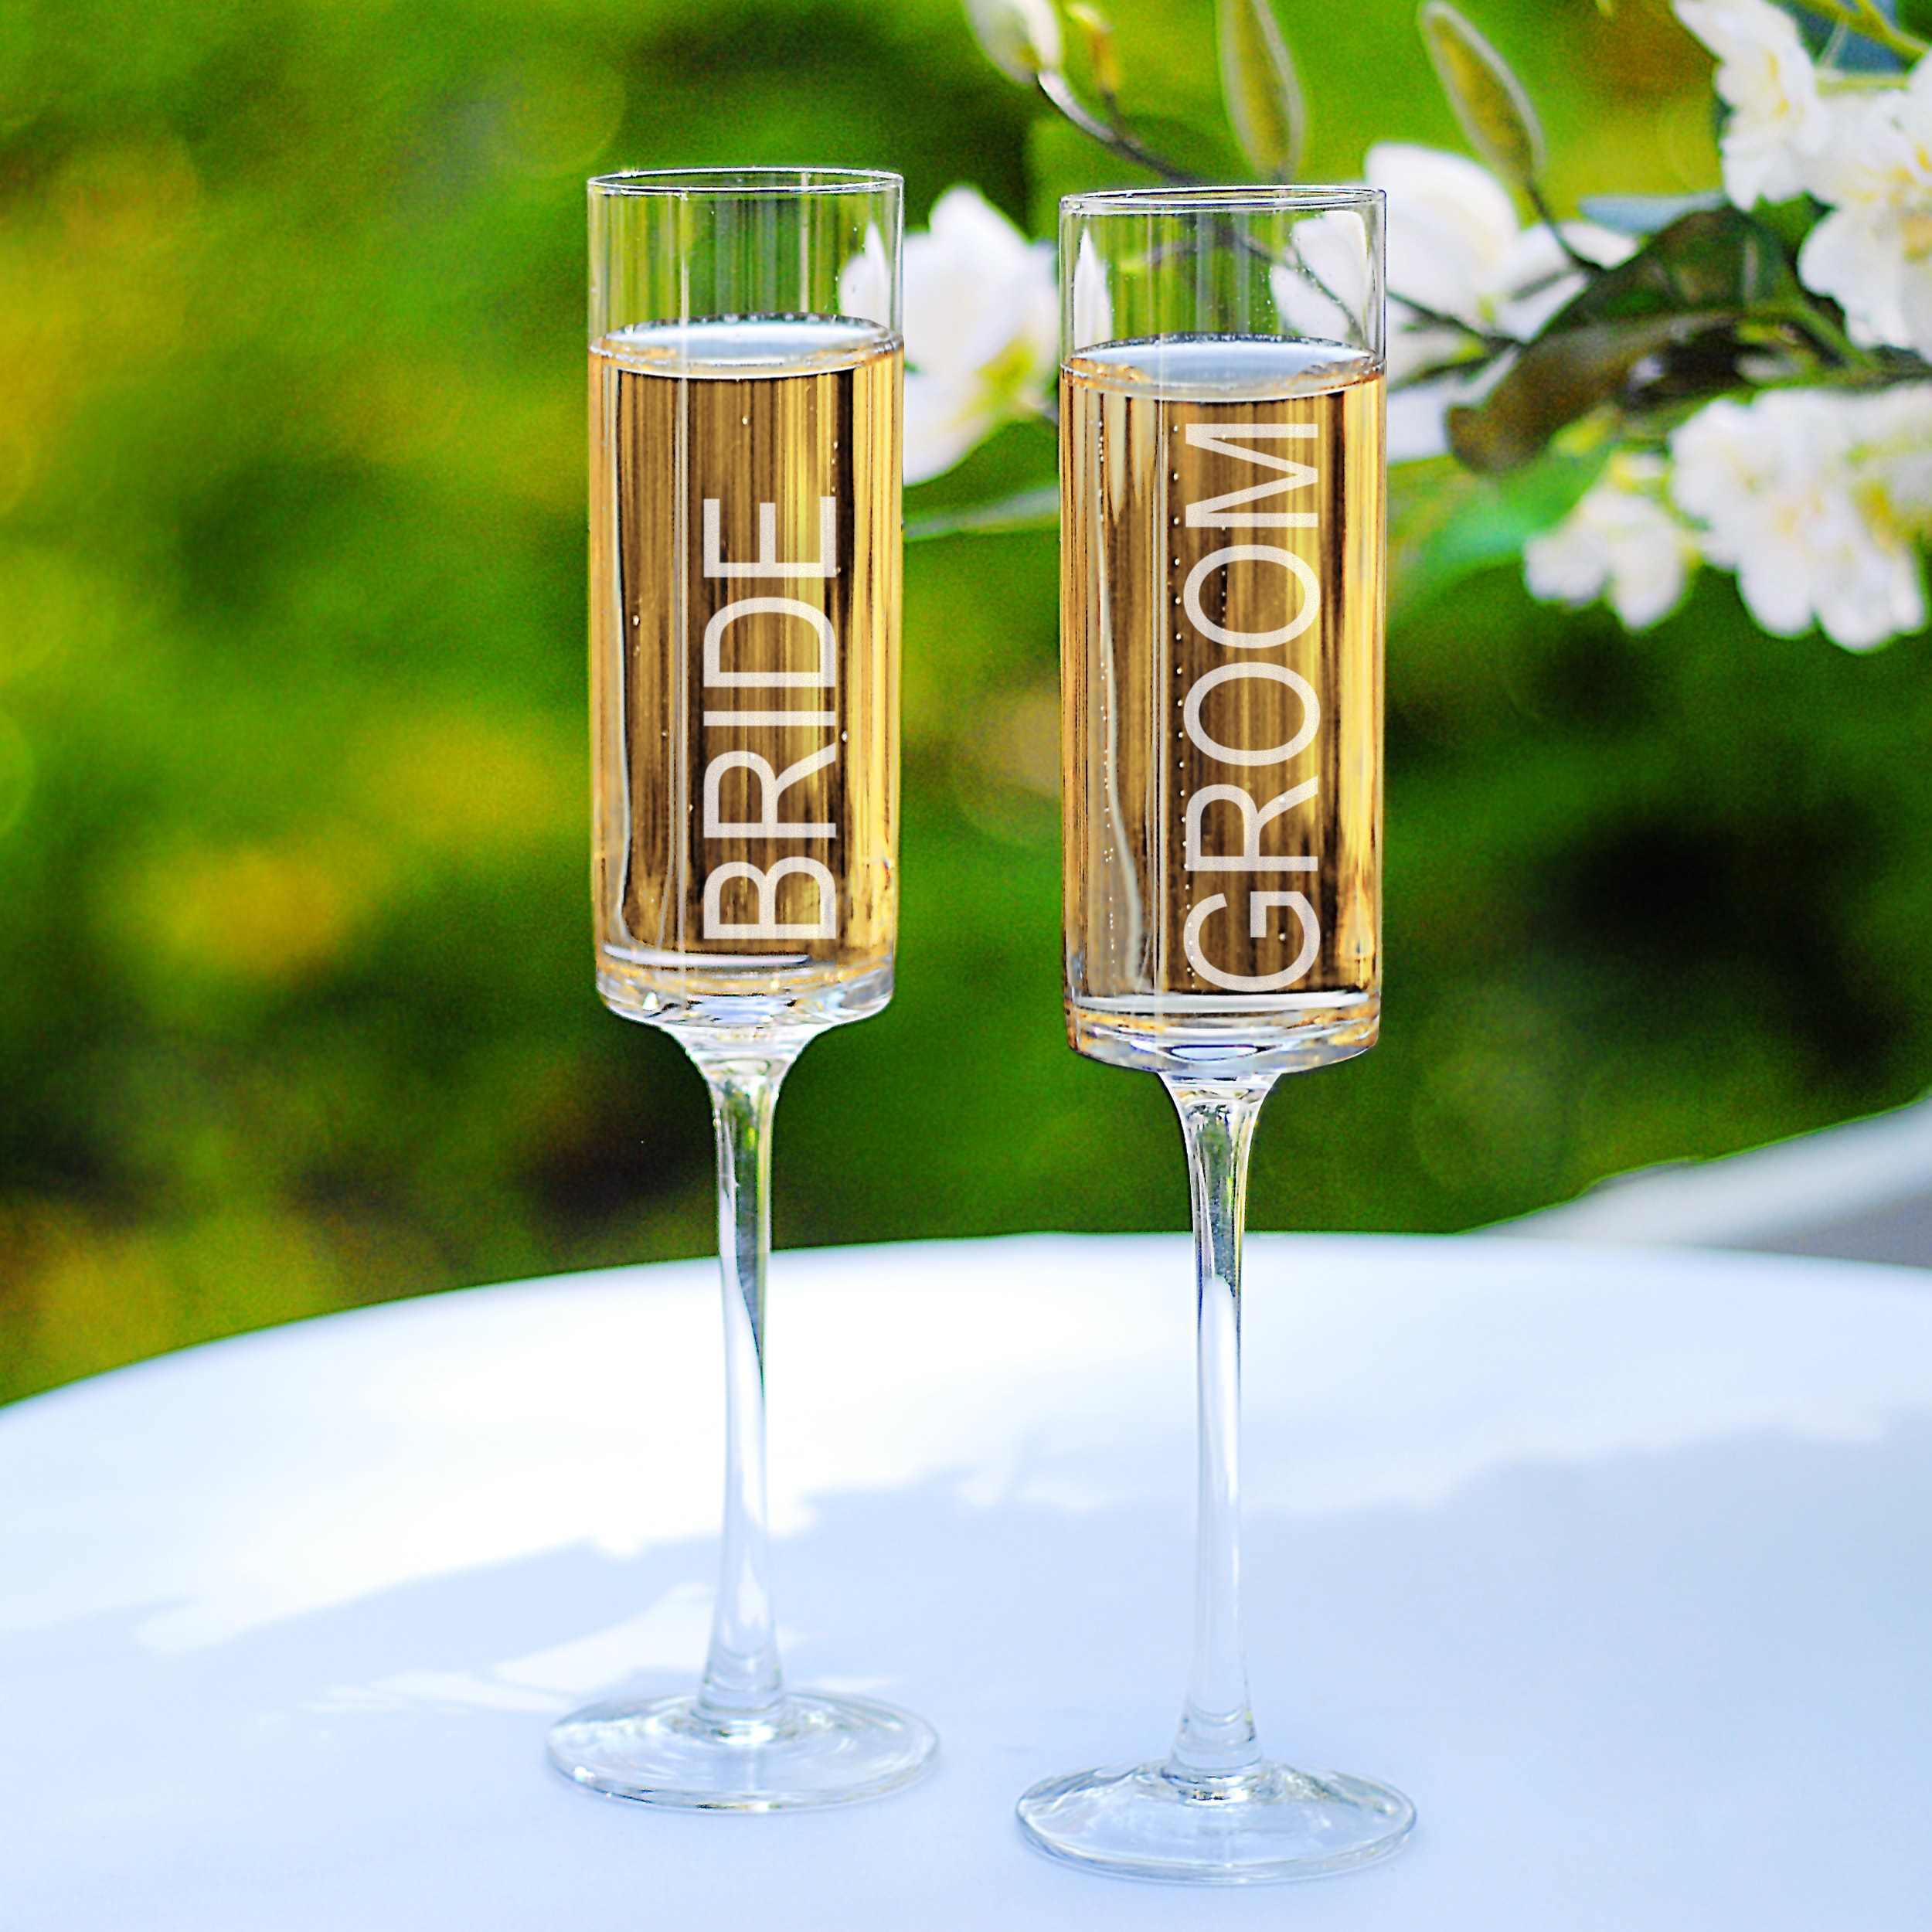 https://ak1.ostkcdn.com/images/products/7662447/7662447/Bride-Groom-Contemporary-Champagne-Flutes-L15075568.jpg